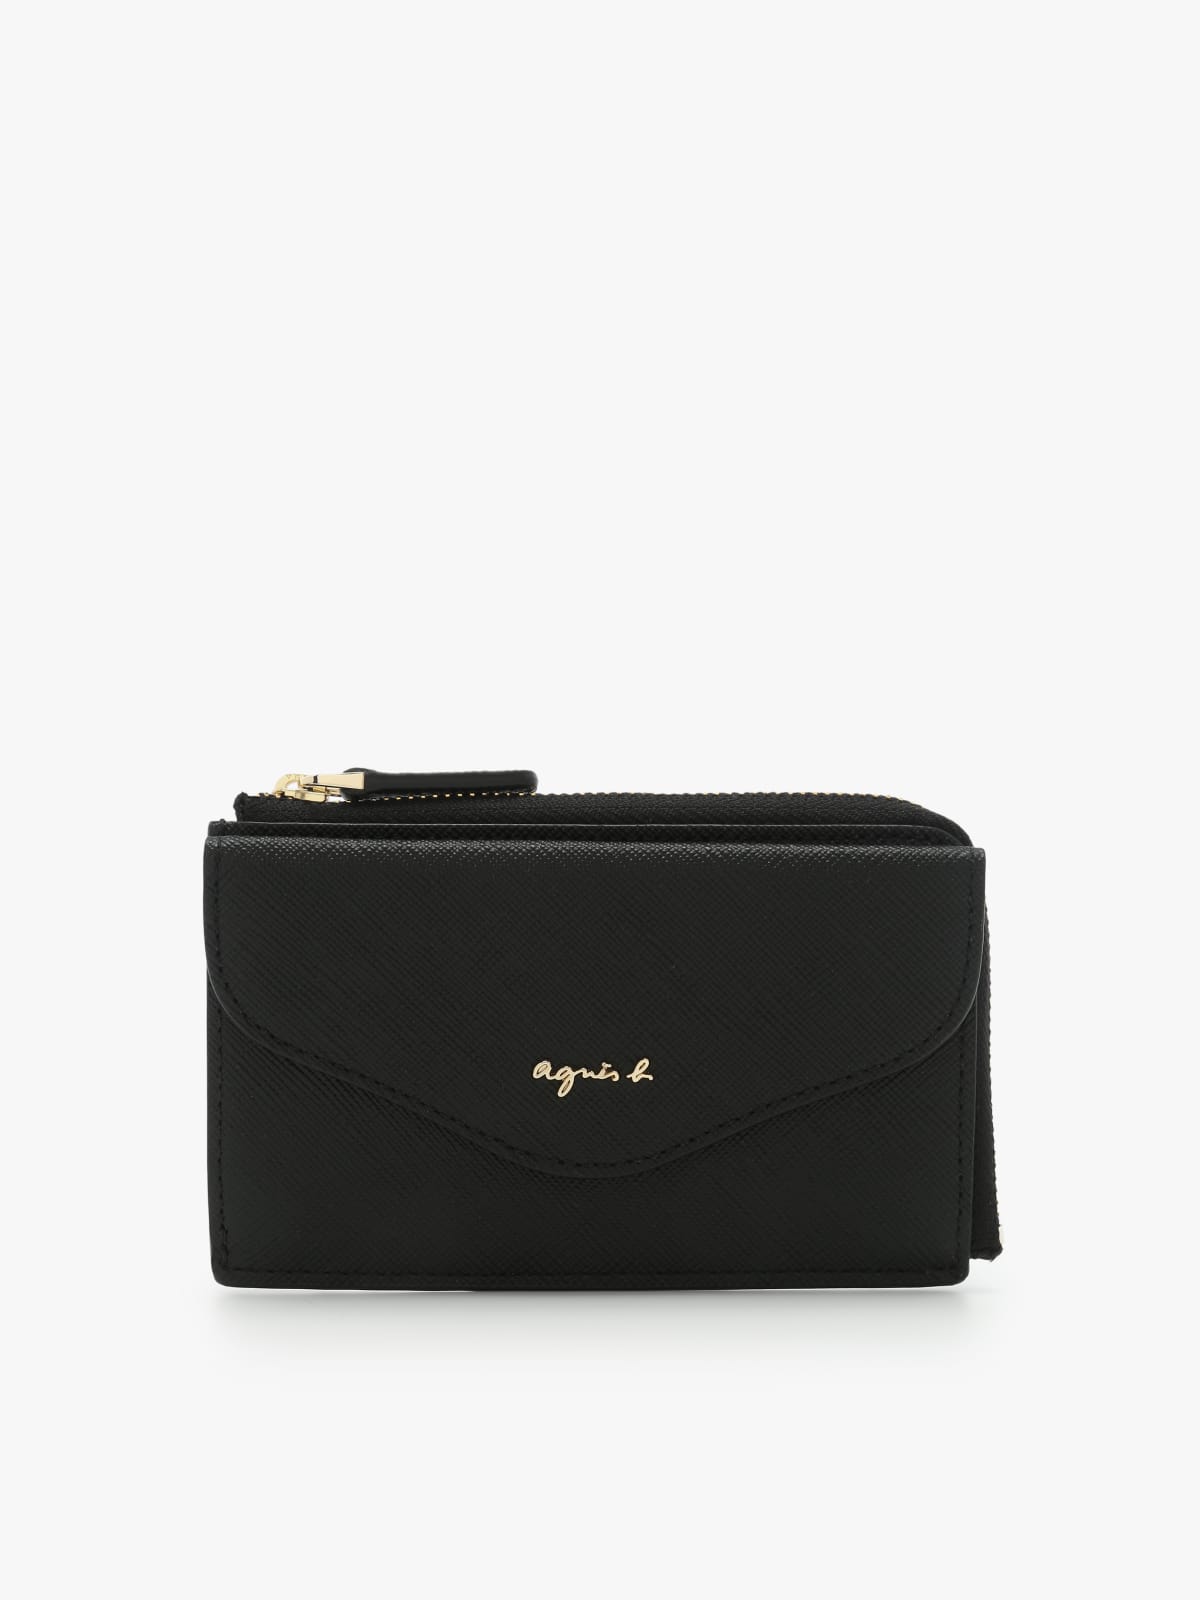 Discover our selection of Small Leather Goods | Agnès b.